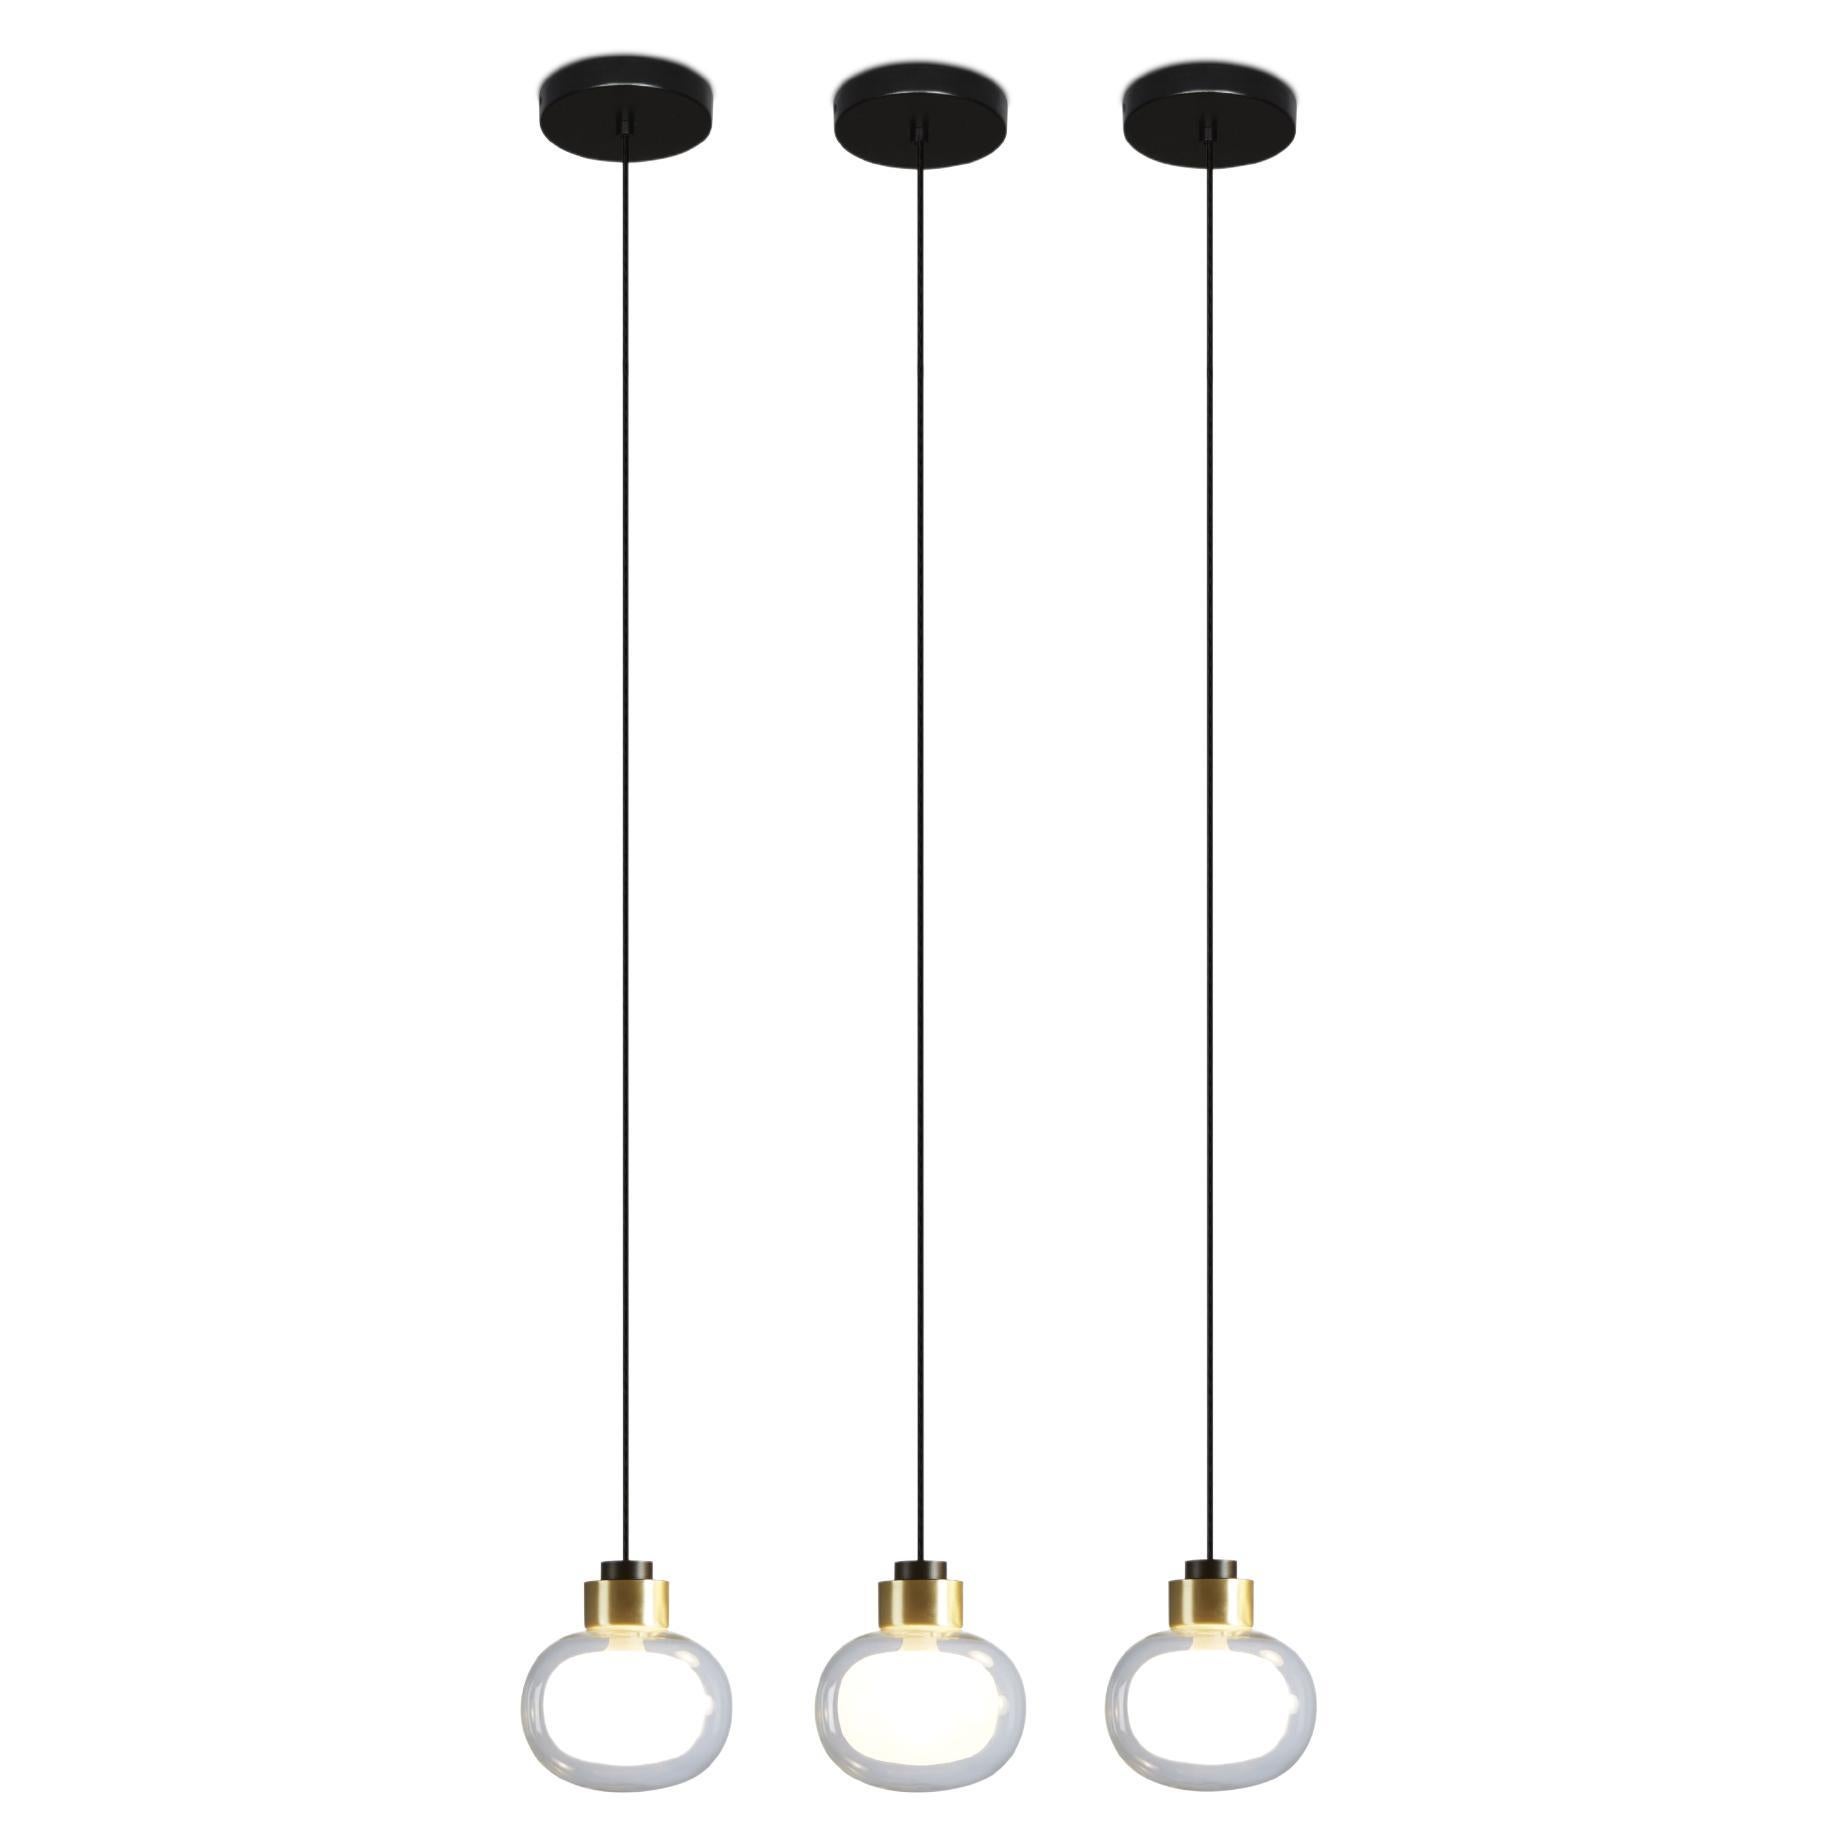 Set of 3 Pendant Lamps 'Nabila 552.21' by Tooy, Brushed Brass, Clear Glass